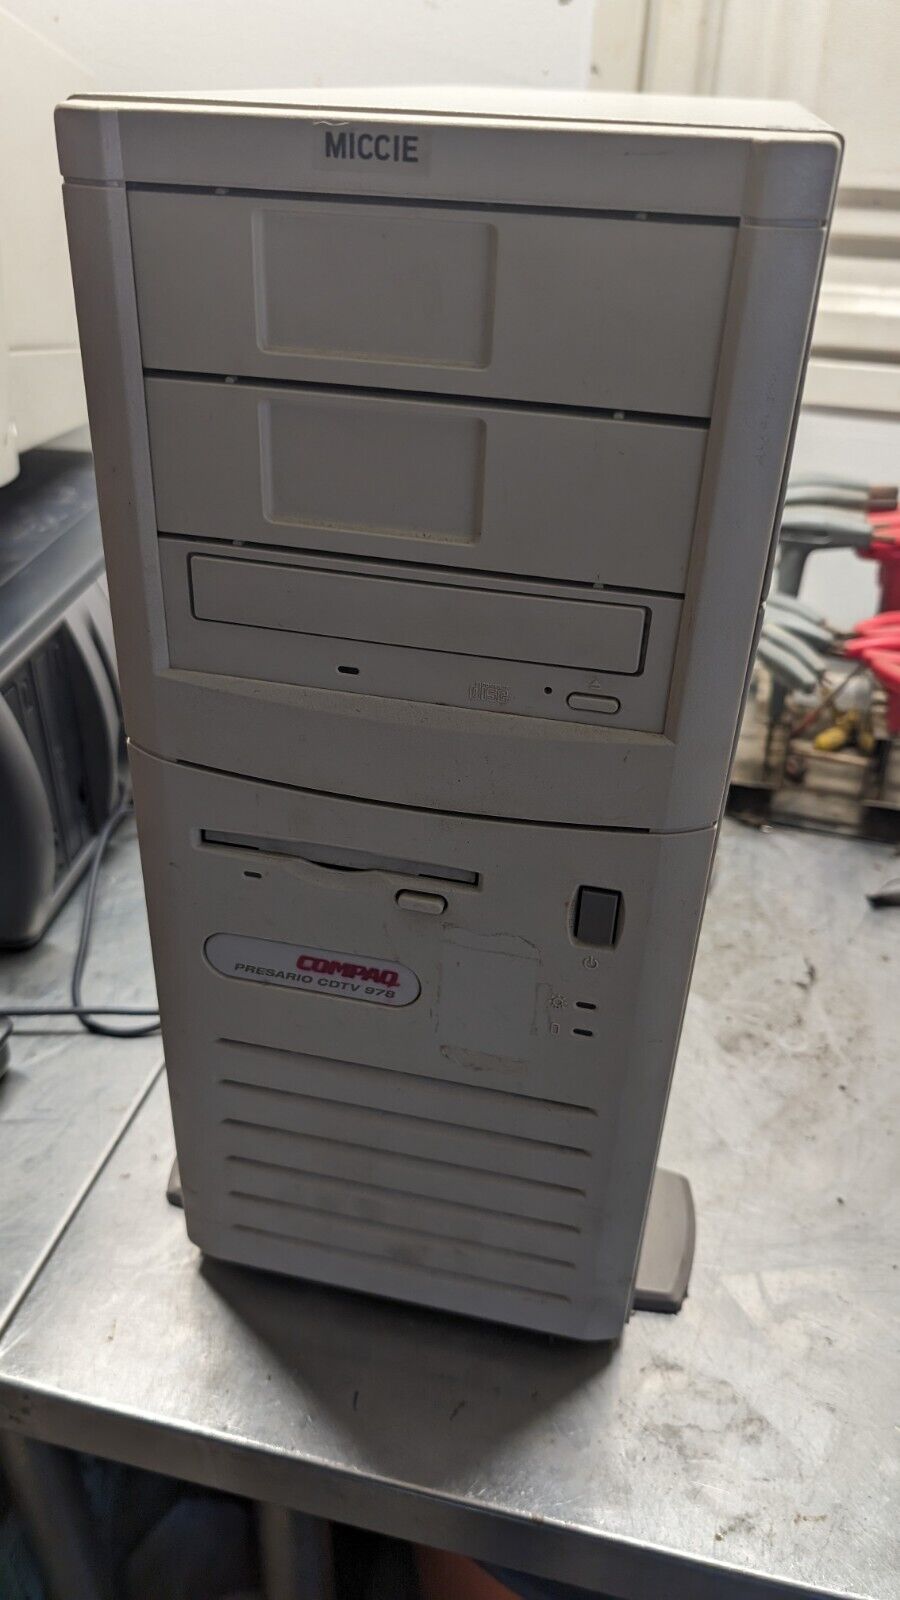 Compaq Presario CDTV 978 in working condition TOWER ONLY